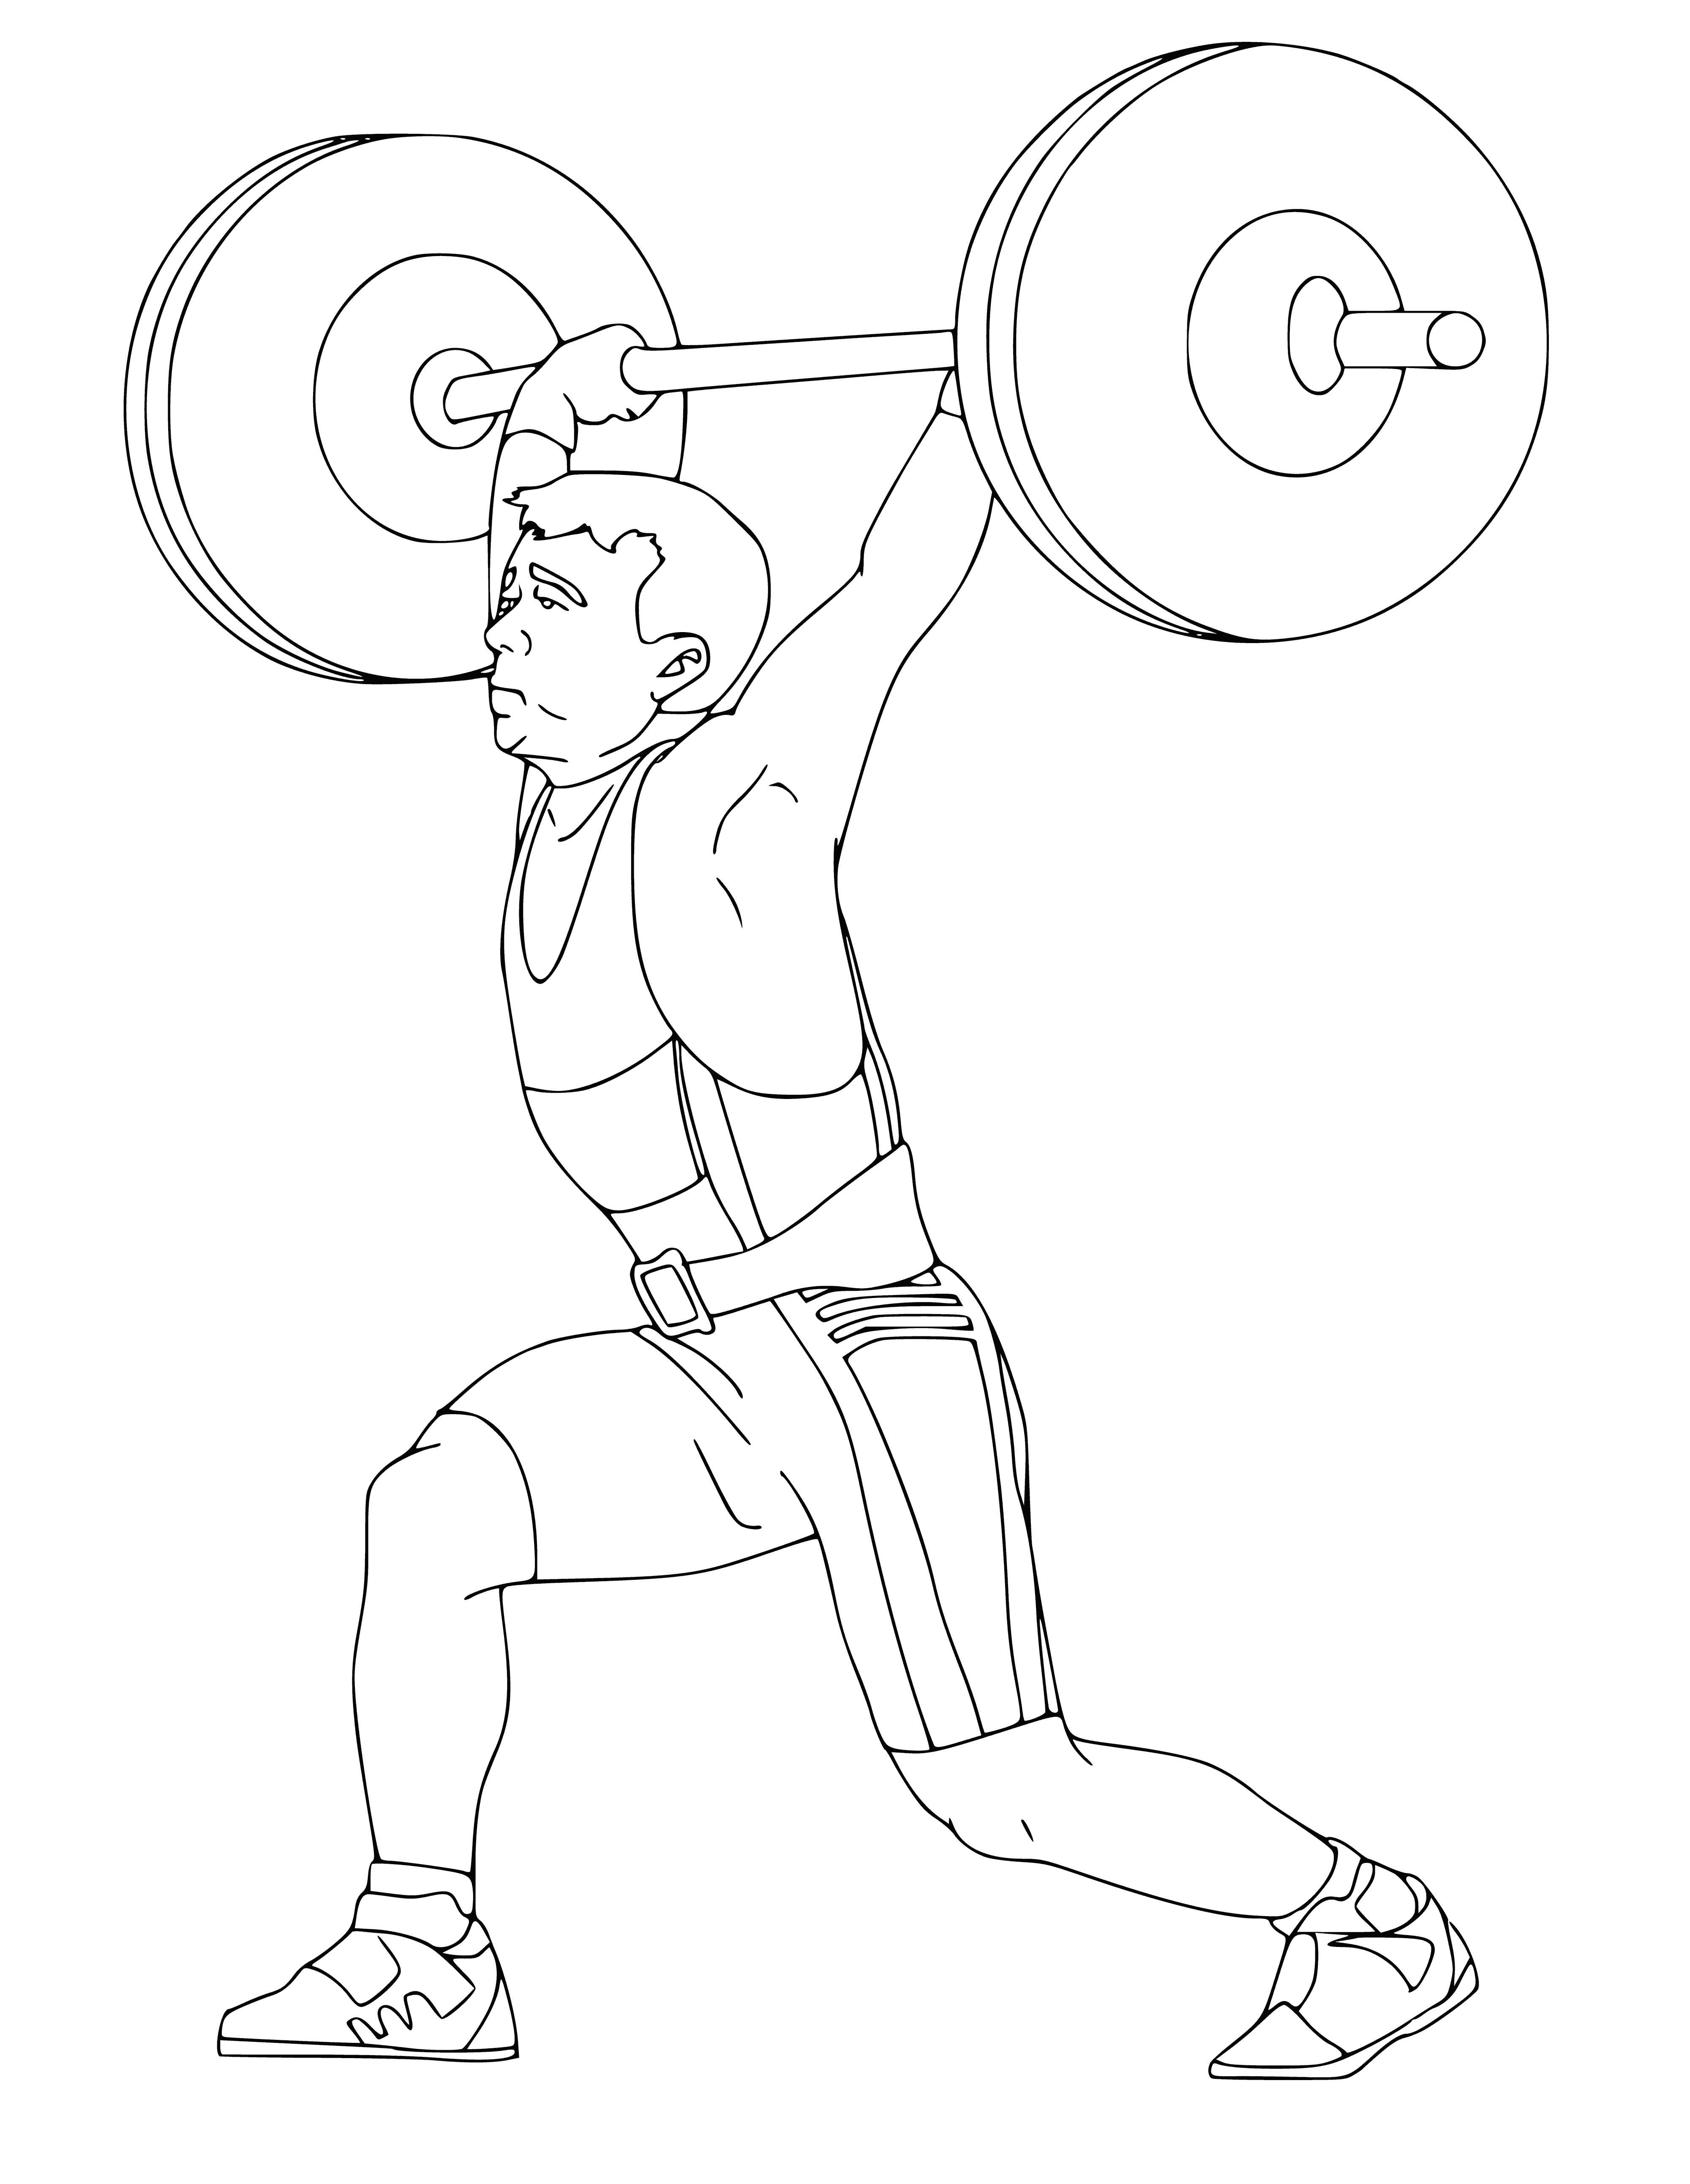 Weightlifting. Weightlifter coloring page